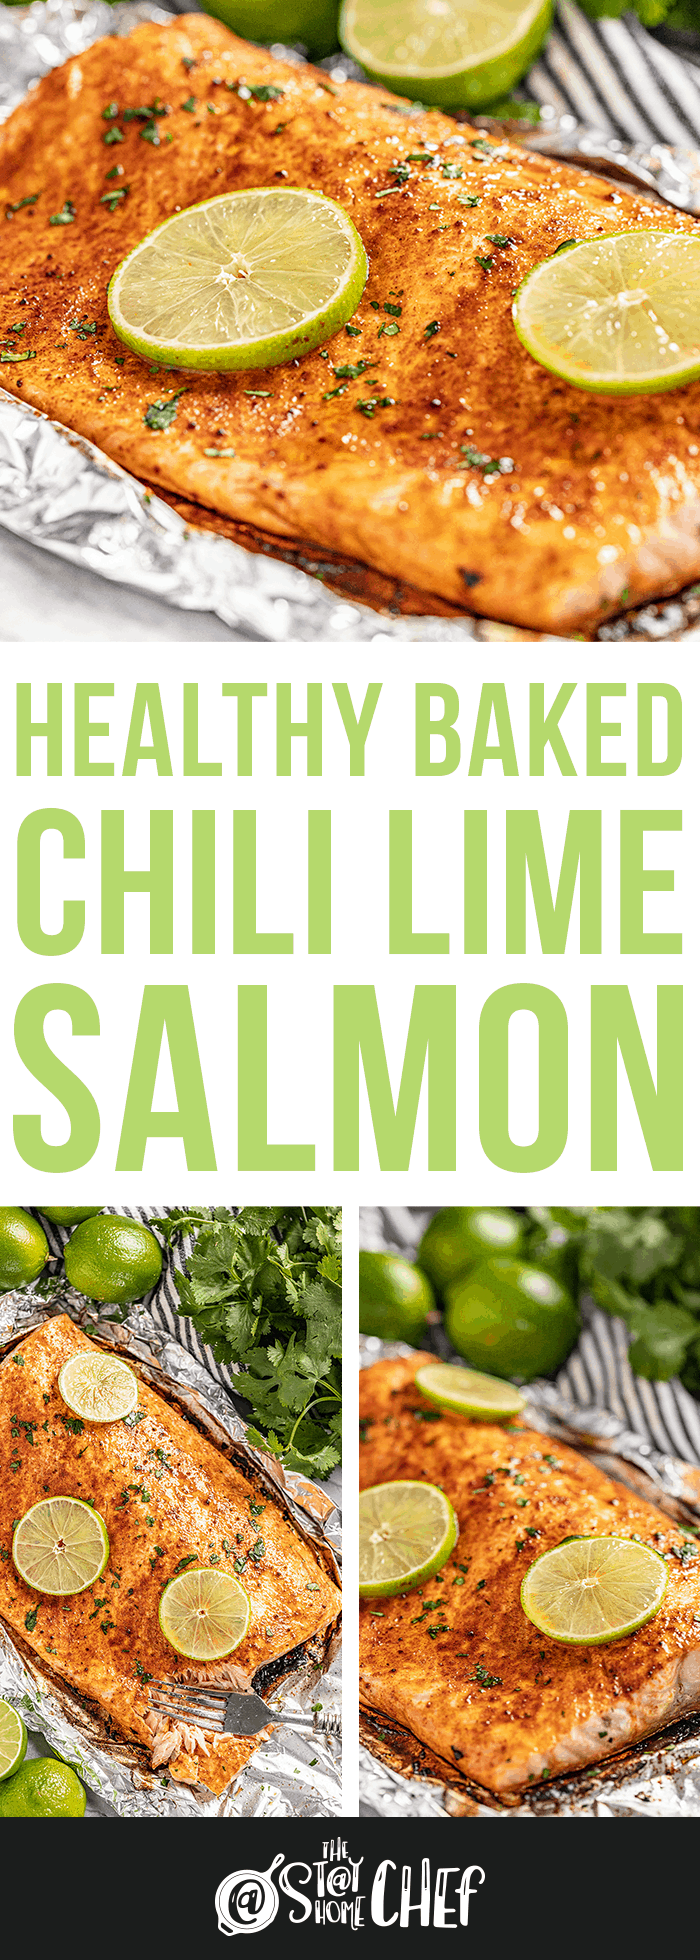 Healthy Baked Chili Lime Salmon